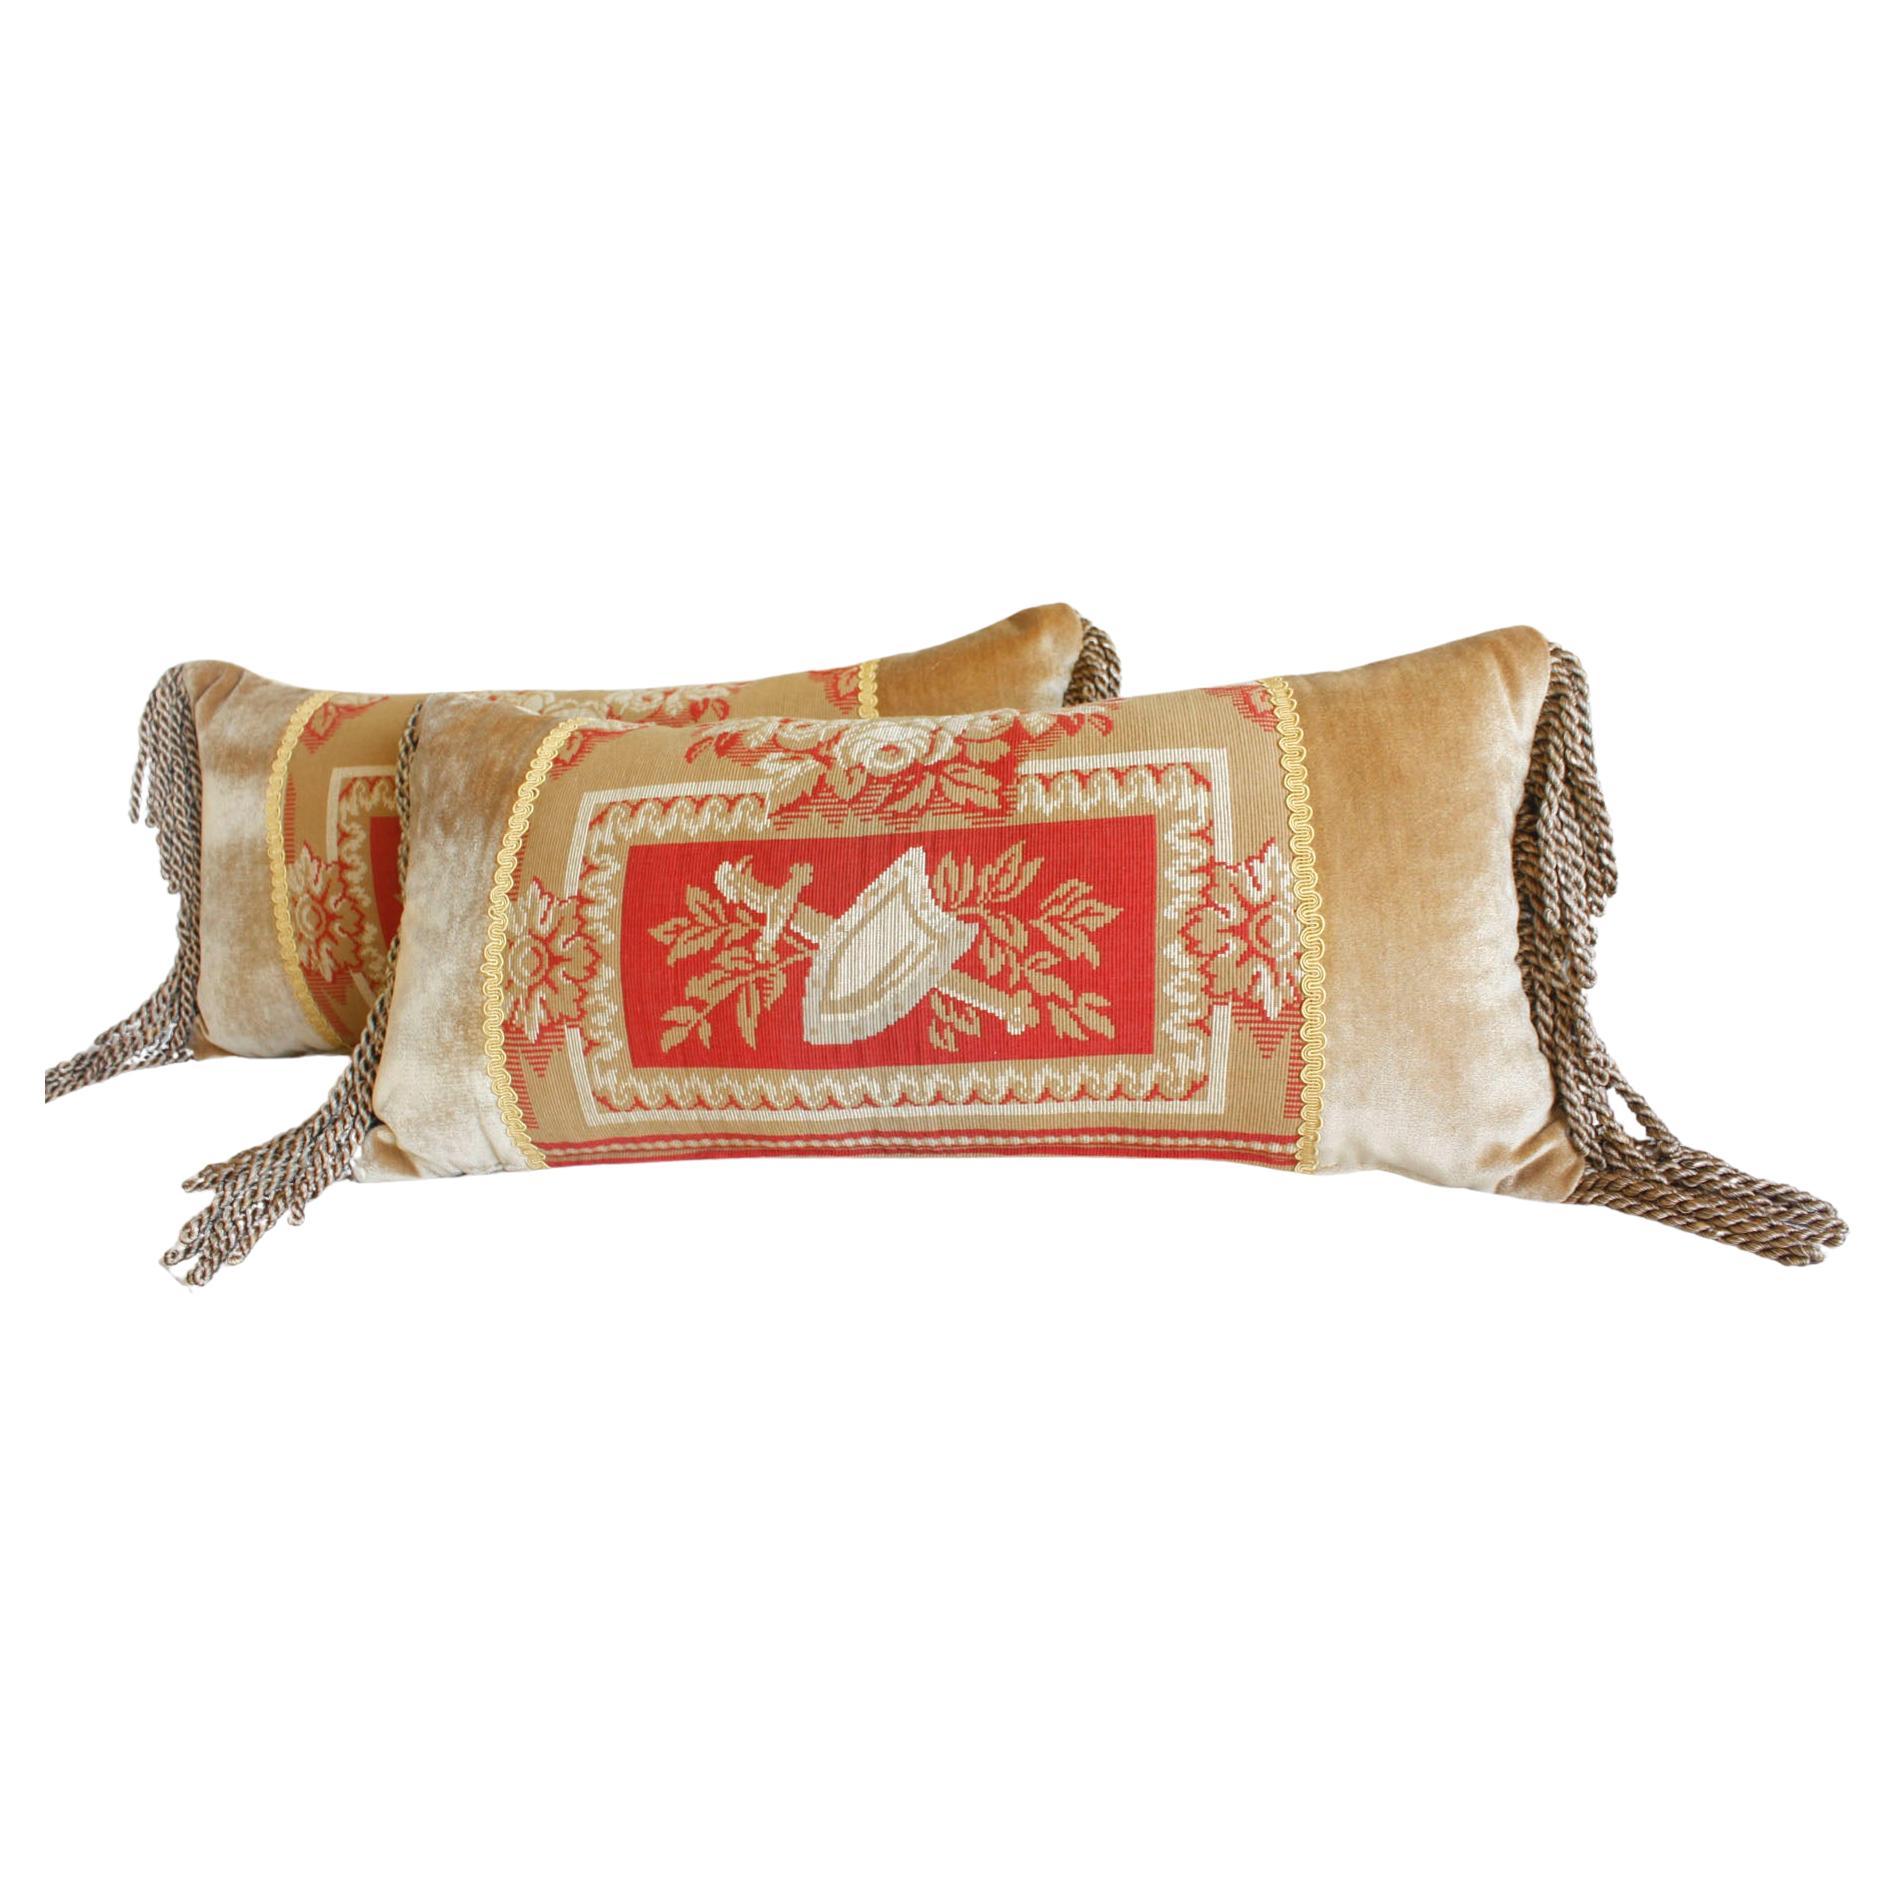 Neoclassical-Style Tapestry Pillows with Shield and Sword Design